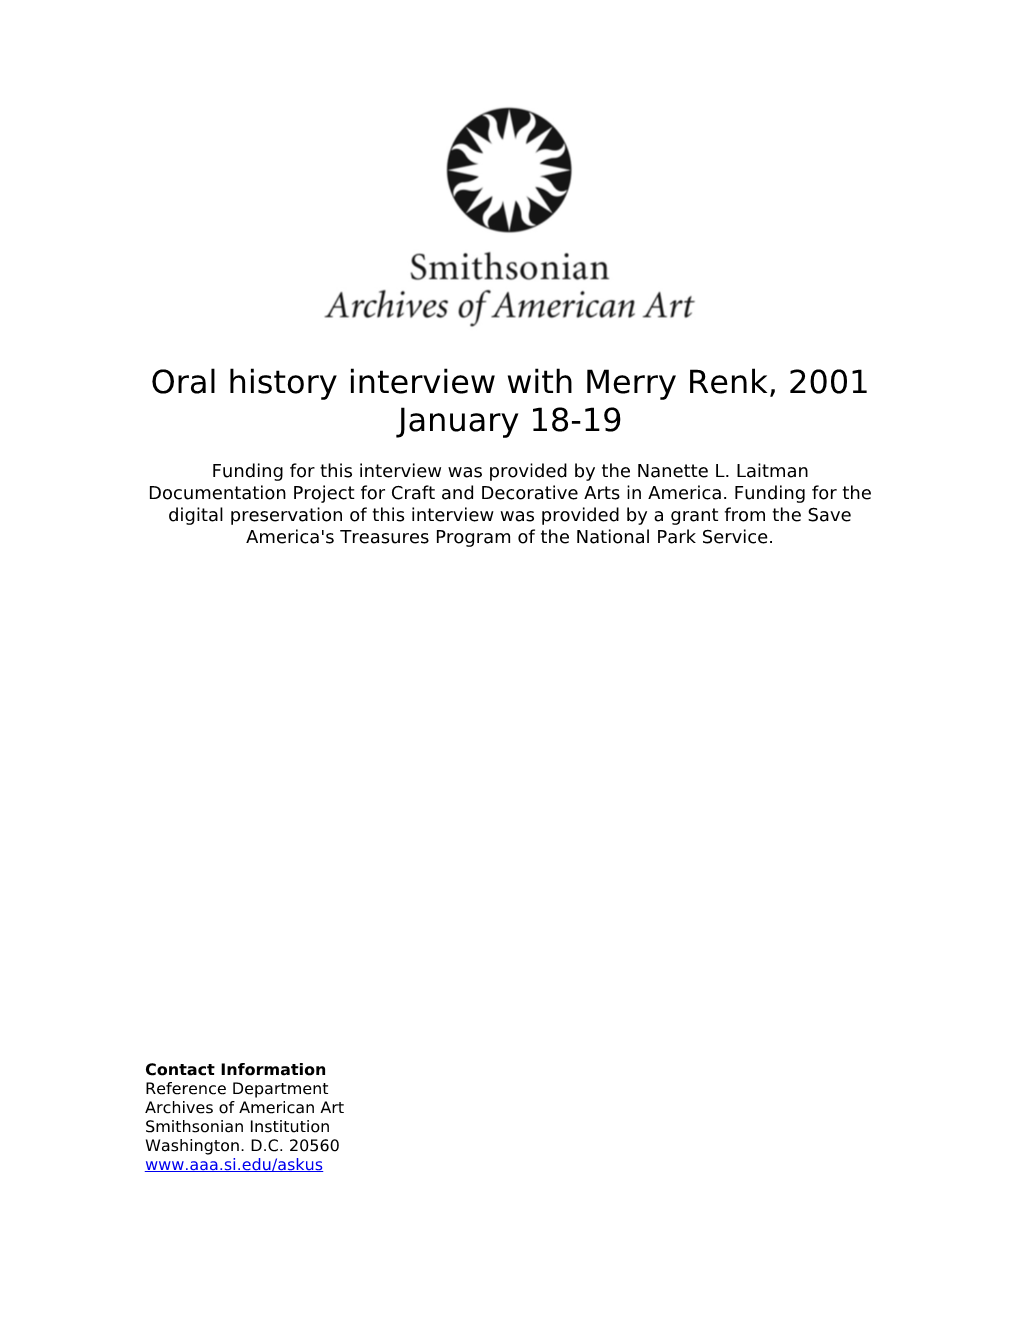 Oral History Interview with Merry Renk, 2001 January 18-19